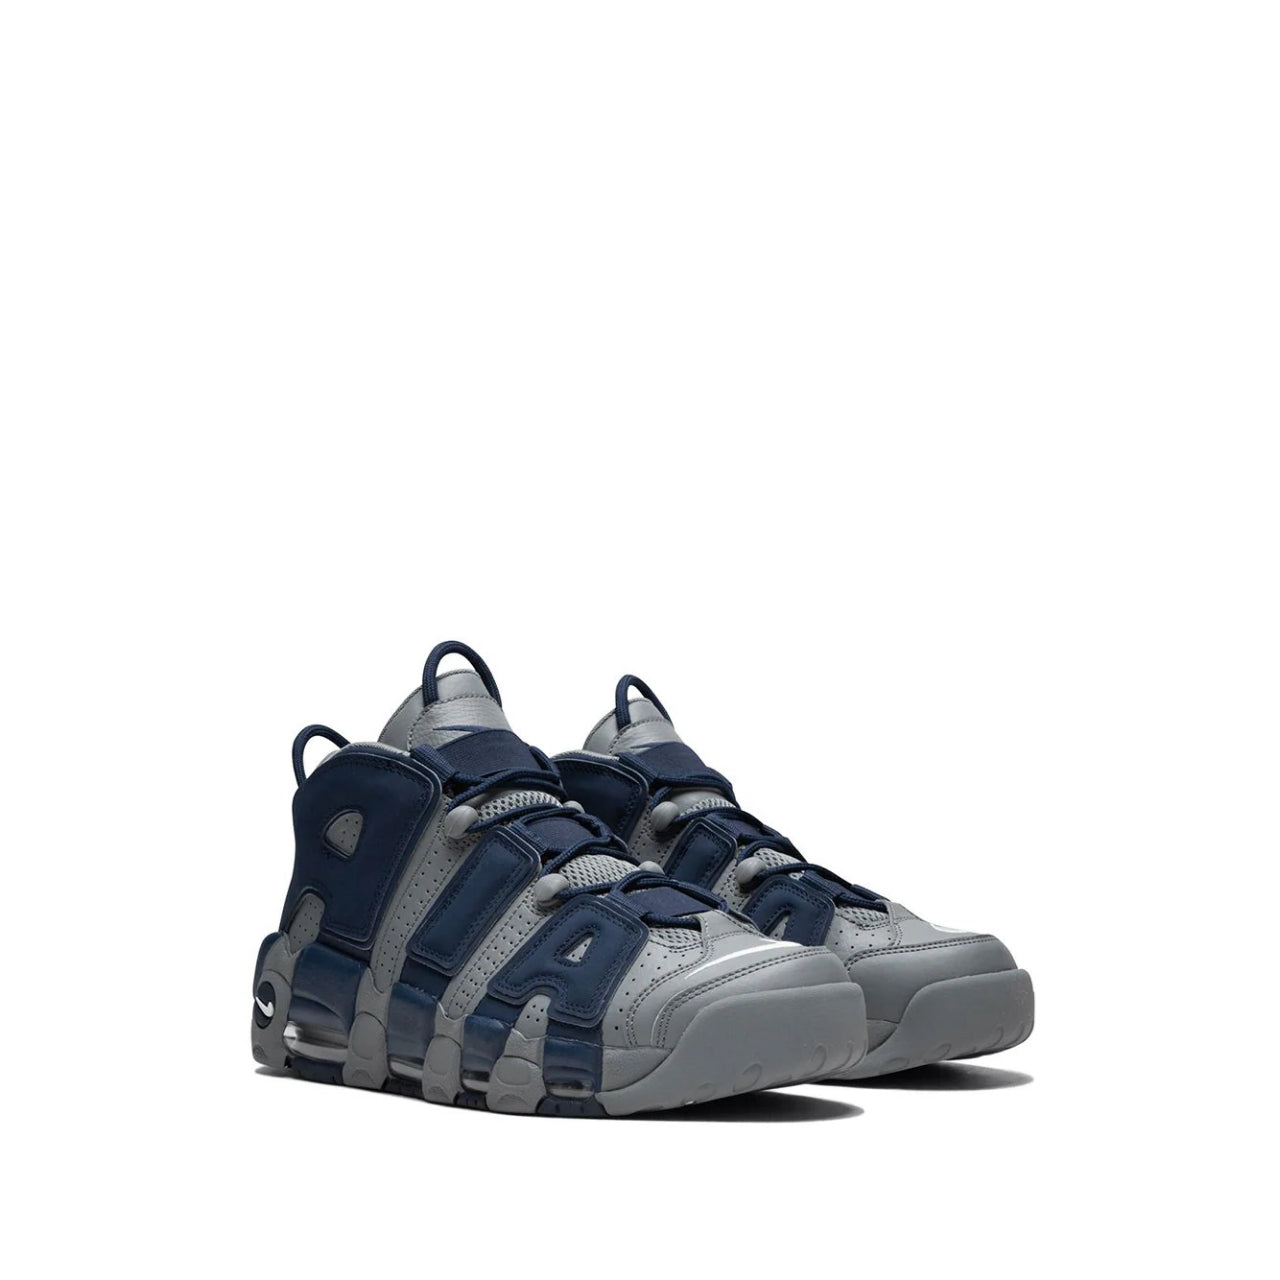 Nike Air More Uptempo '96 'Georgetown'